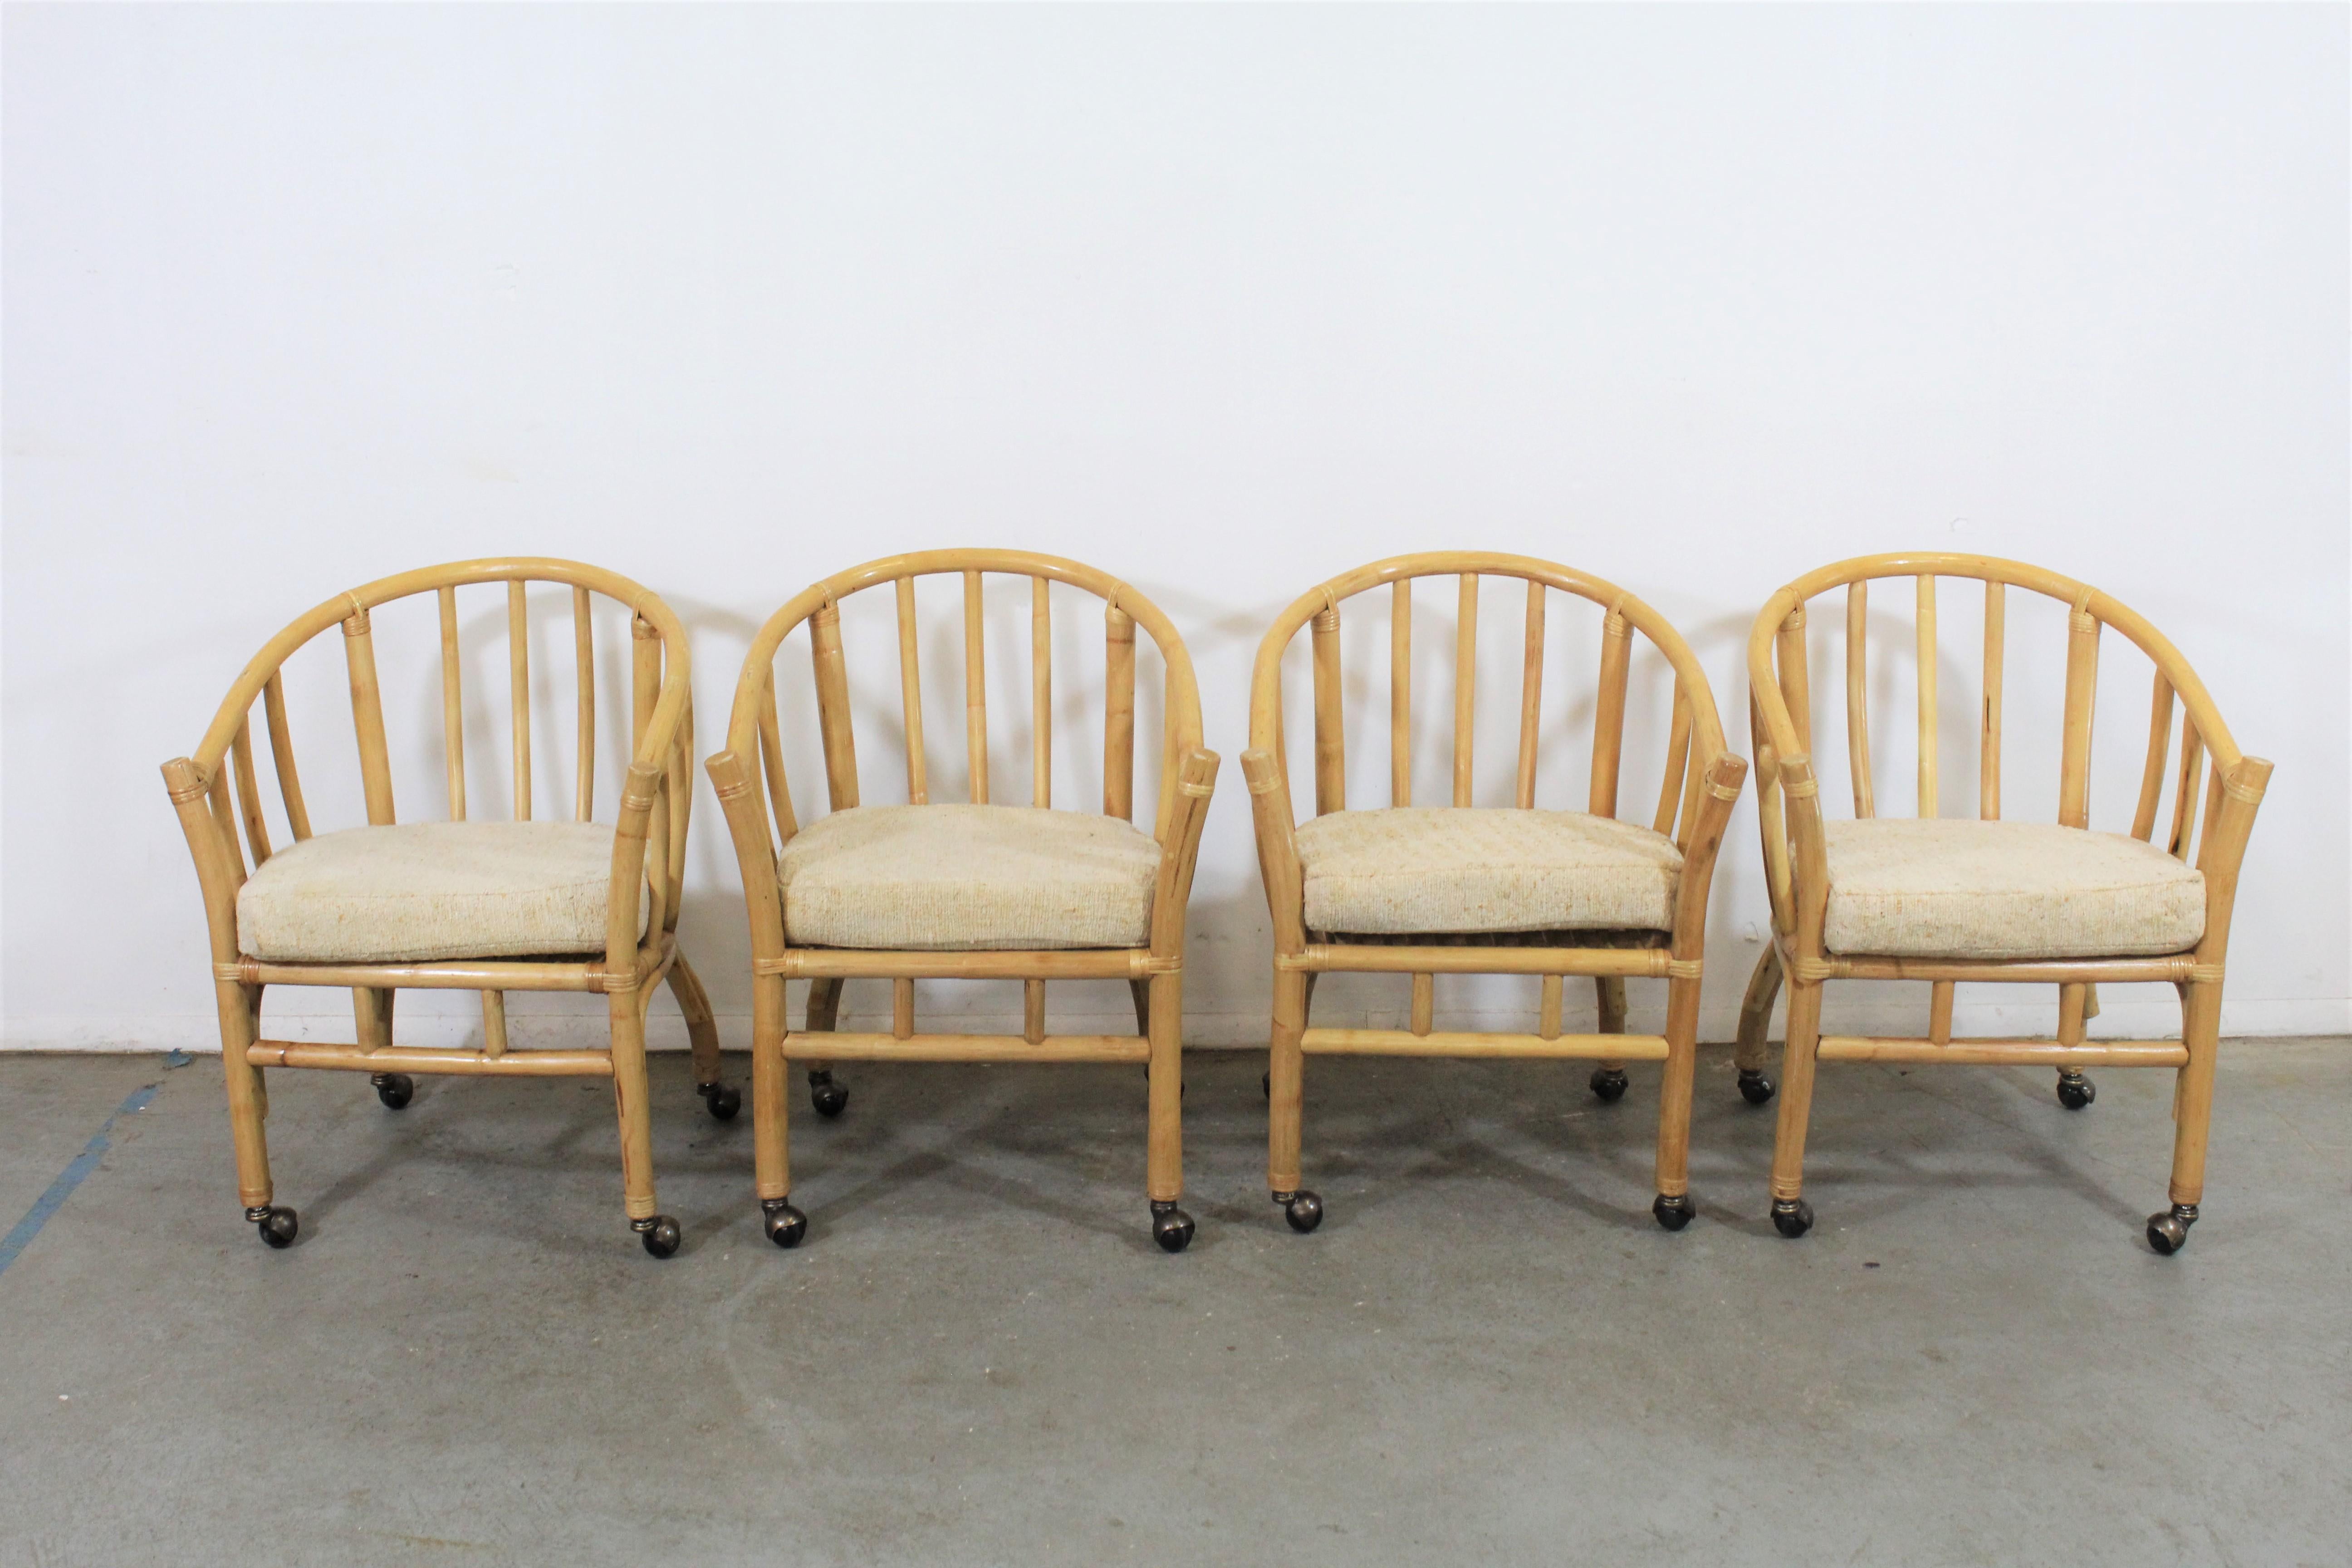 Set of 4 midcentury rattan dining chairs with rollers

Offered is a vintage set of 4 Mid-Century Modern rattan dining chairs. This set has removable cushions and could make an excellent addition to any home. They are in good vintage condition.